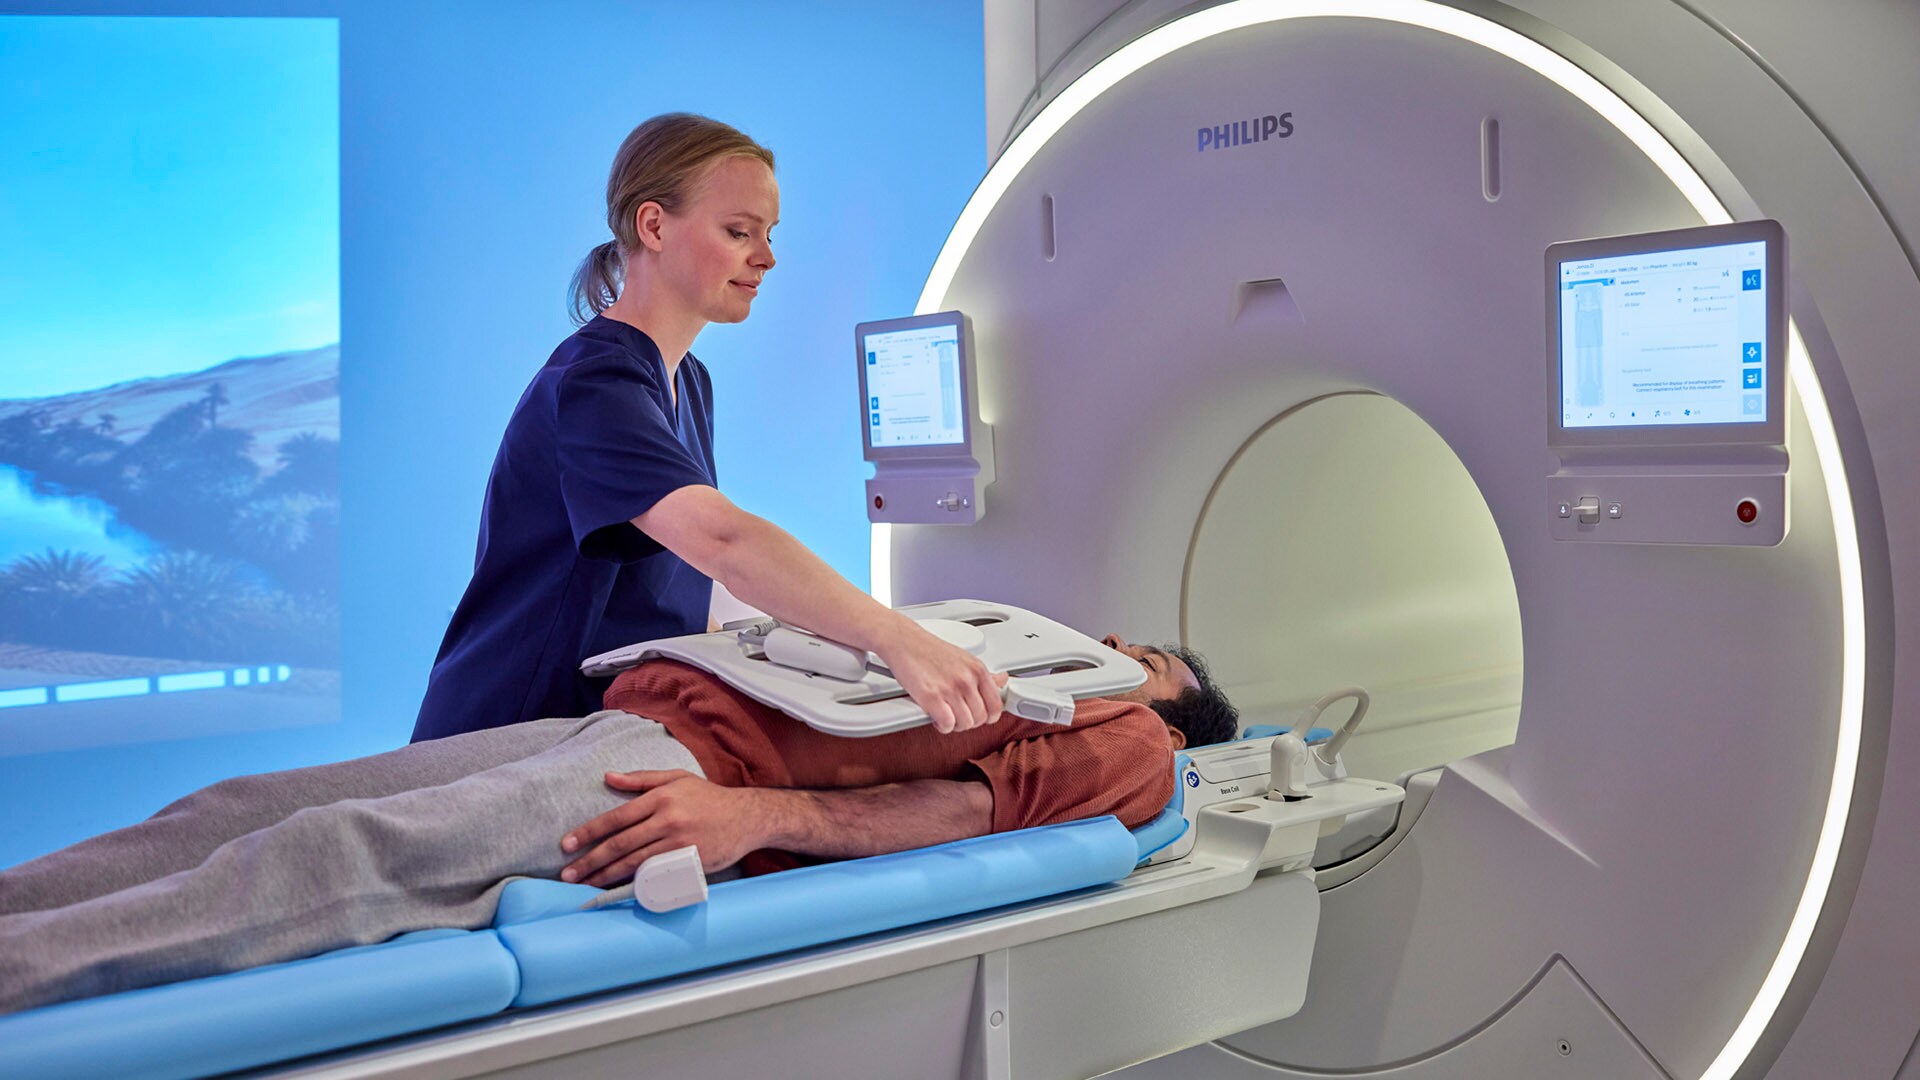 Philips launches new AI-enabled MR portfolio of smart diagnostic systems, optimized workflow solutions and integrated clinical solutions at RSNA 2021